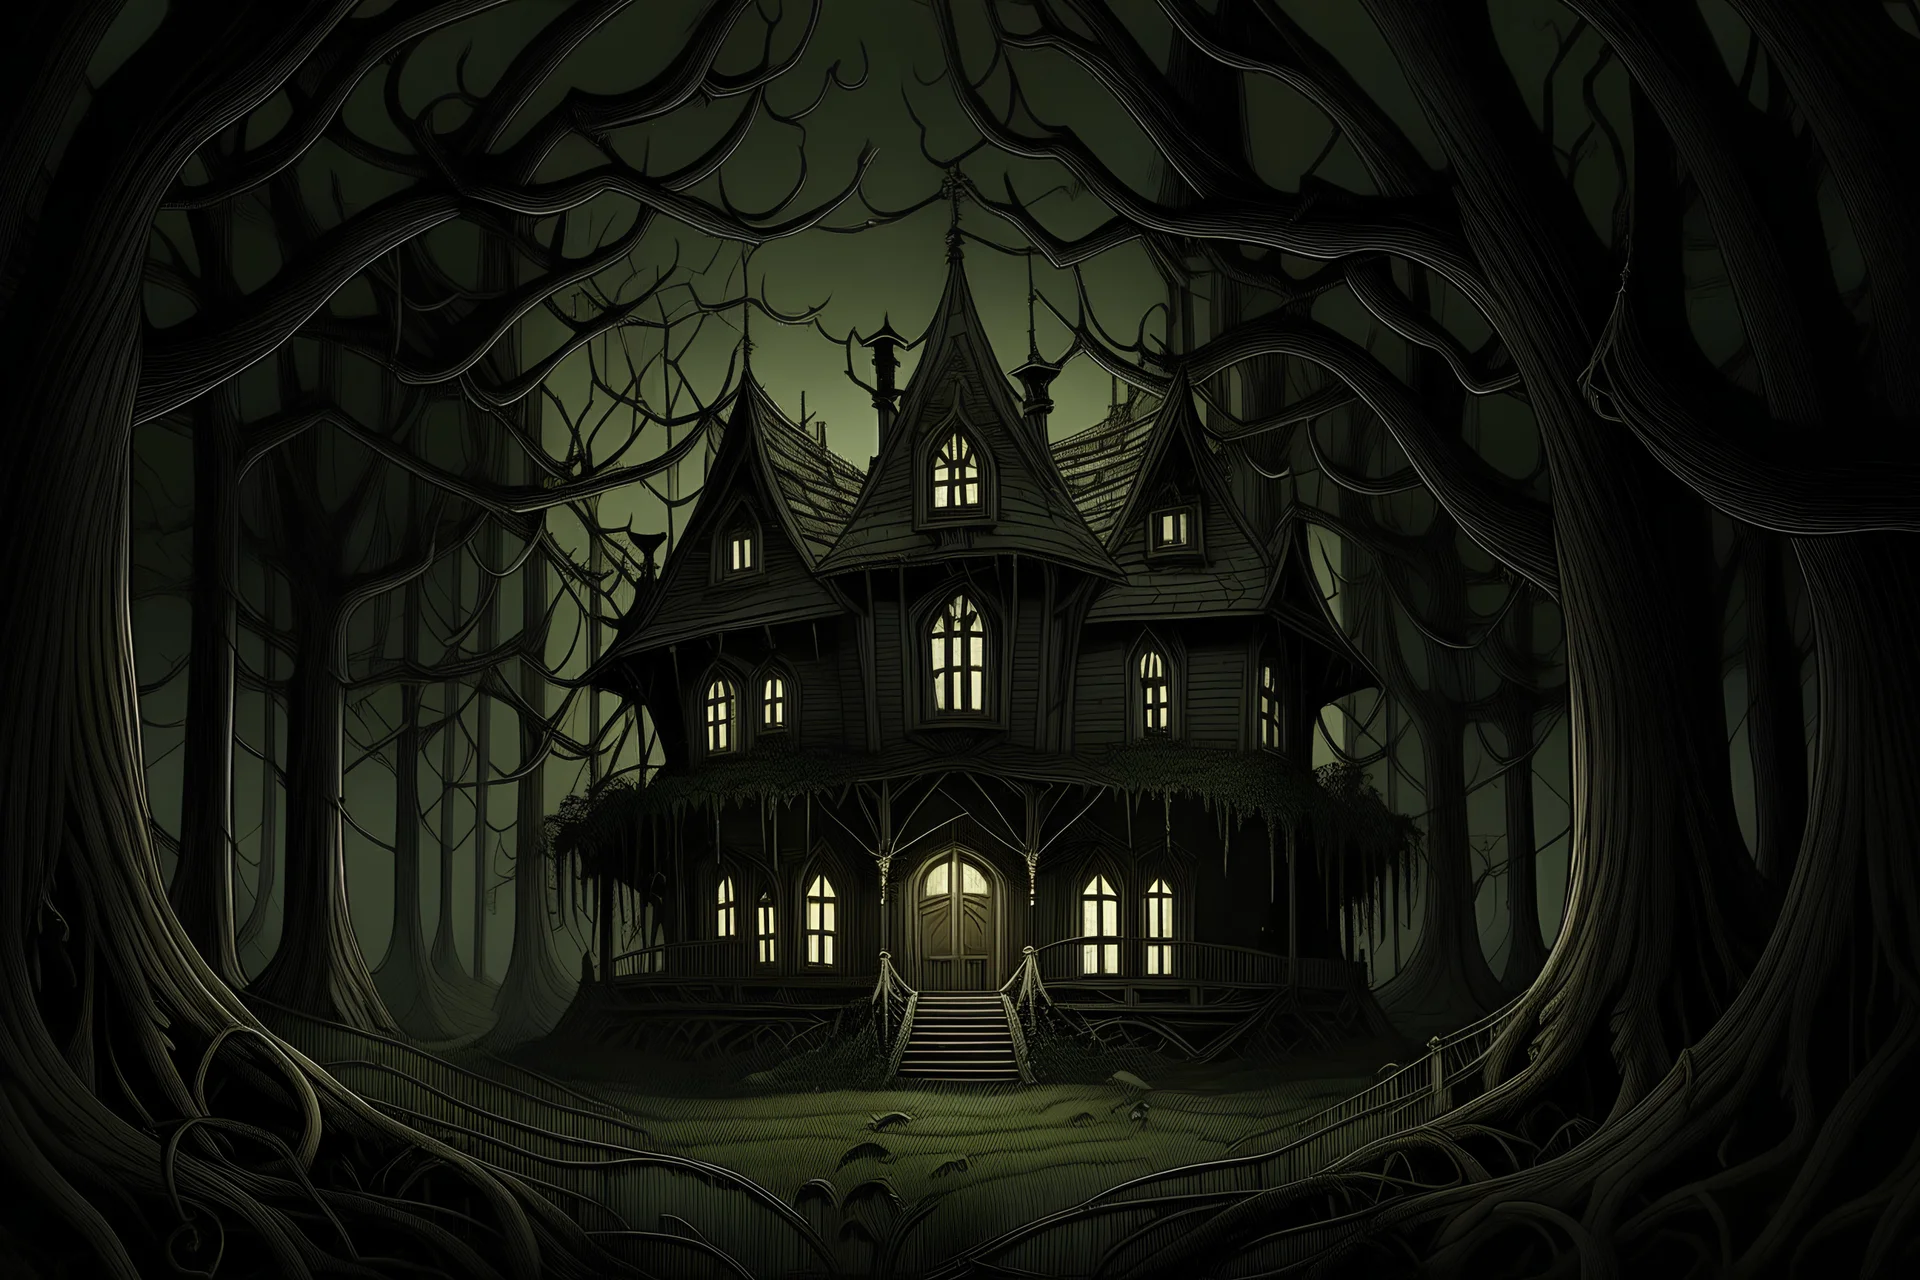 An animated photo where a tall, lighted mansion with a triangular roof is surrounded by tall trees in a dark forest. The viewer of the image is facing the front of the house. Grotesque roots are seen throughout the image. Thorny vines cover the various sights of the house.